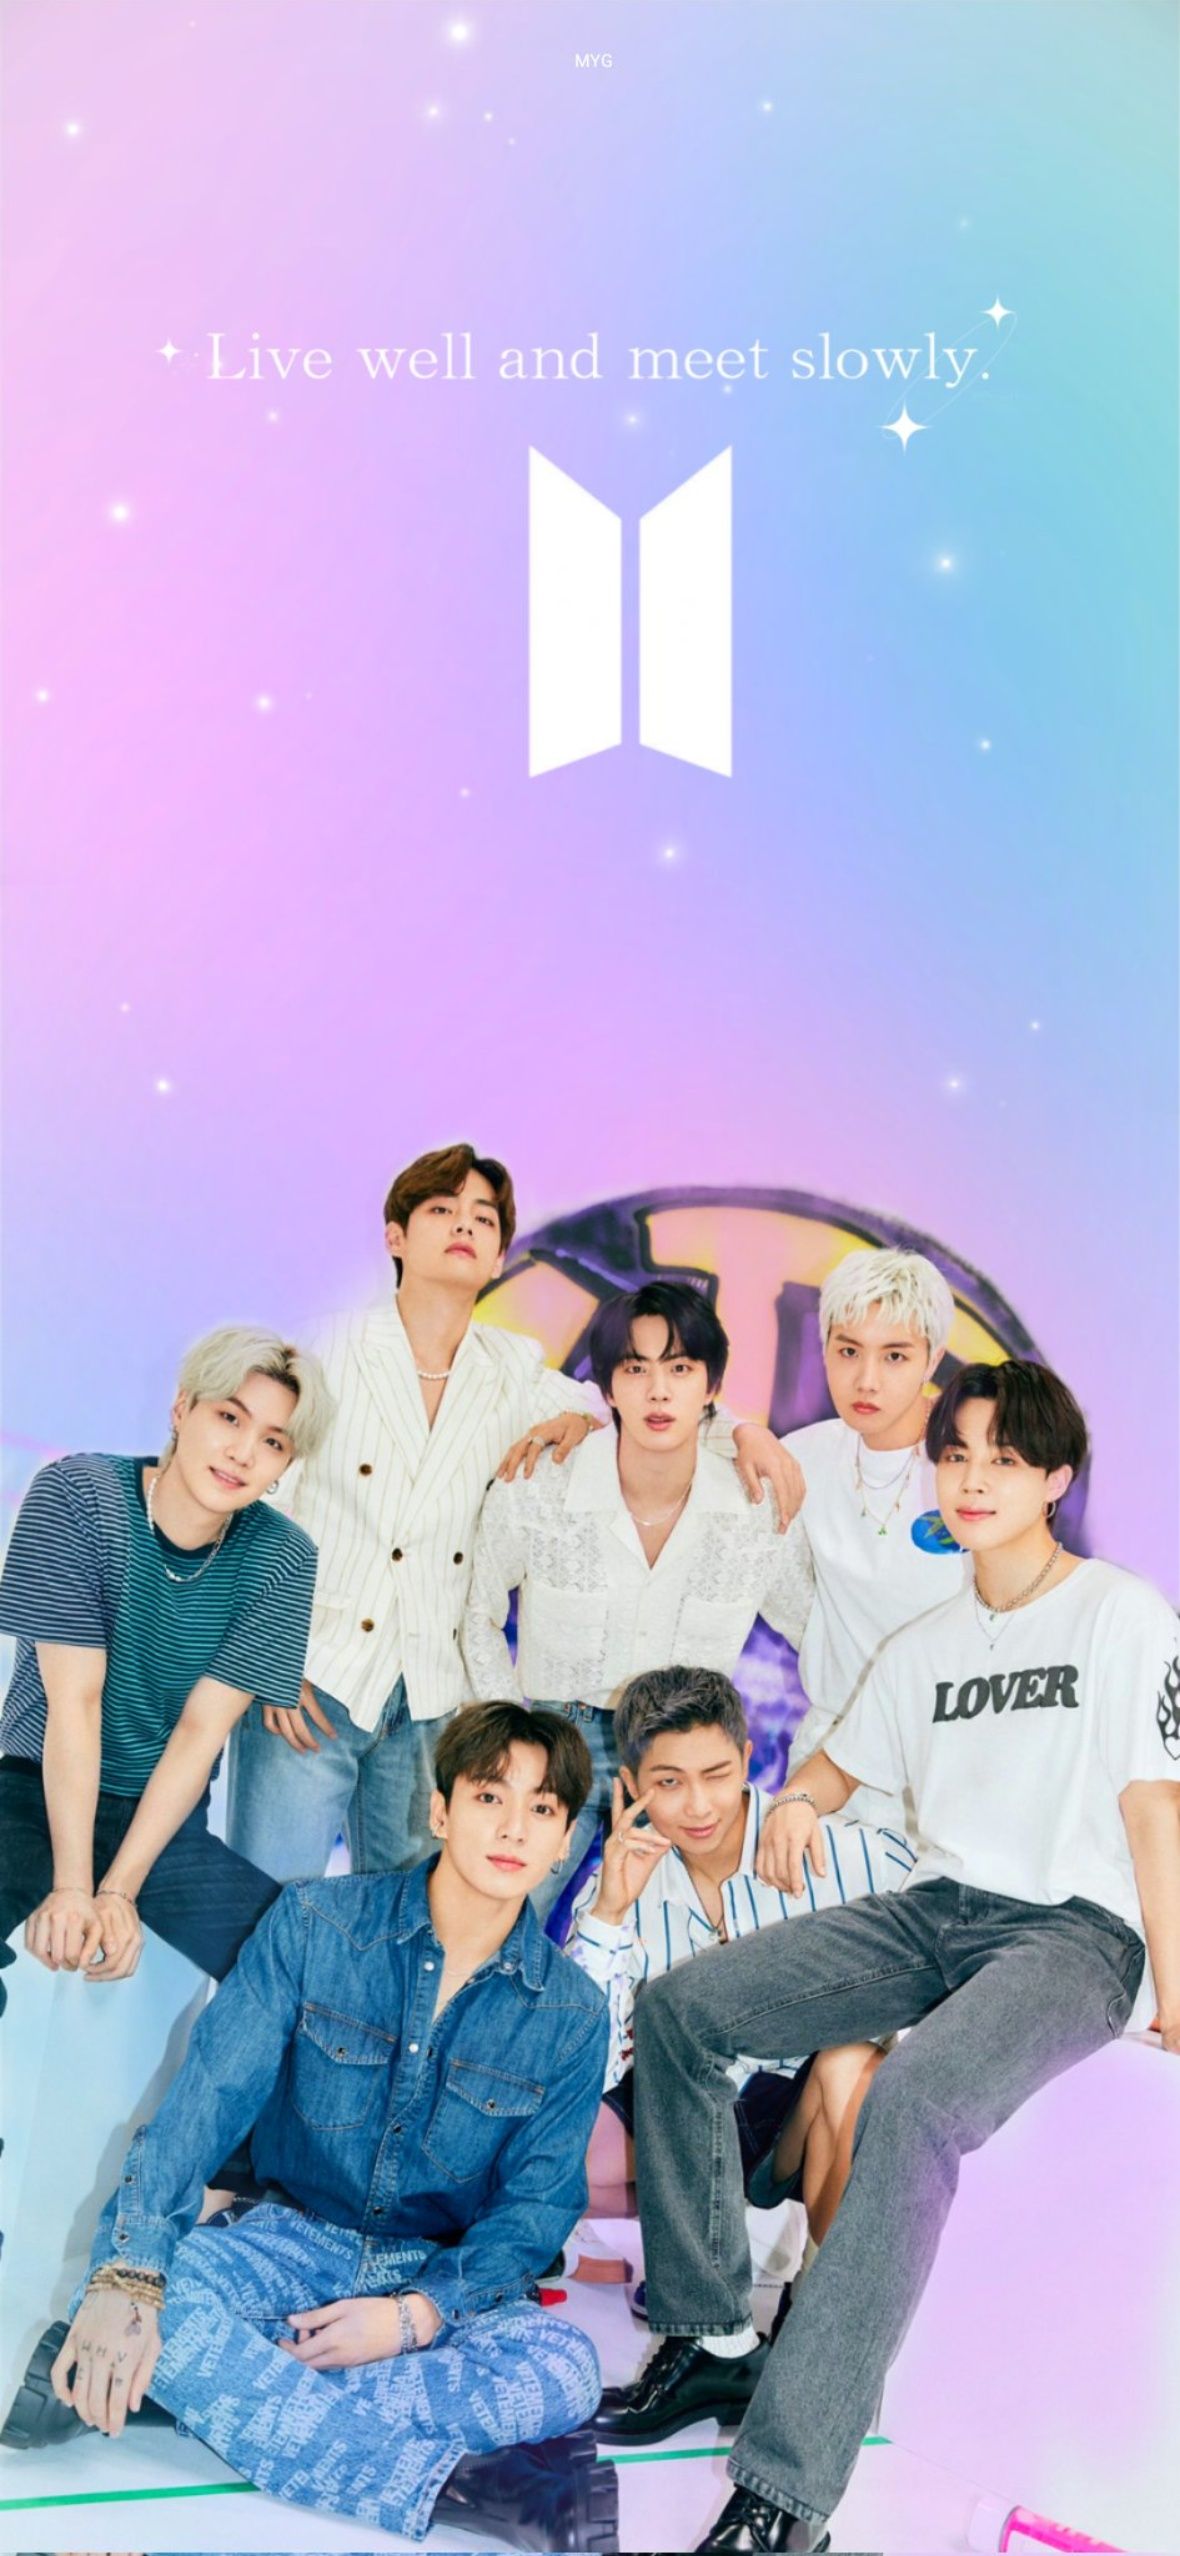 A poster of the group bts - BTS